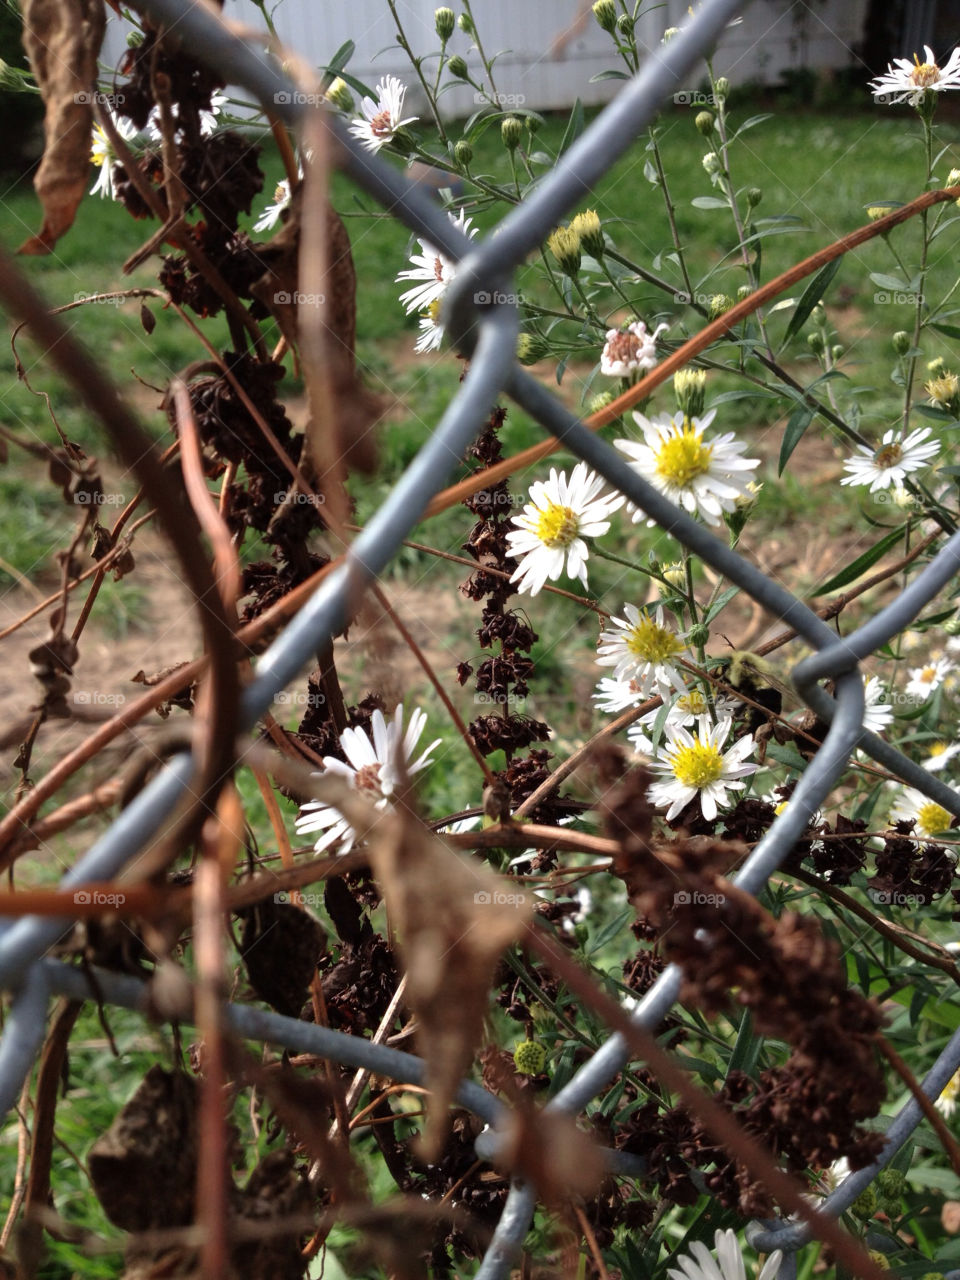 weed fence daisy by danelvr032708